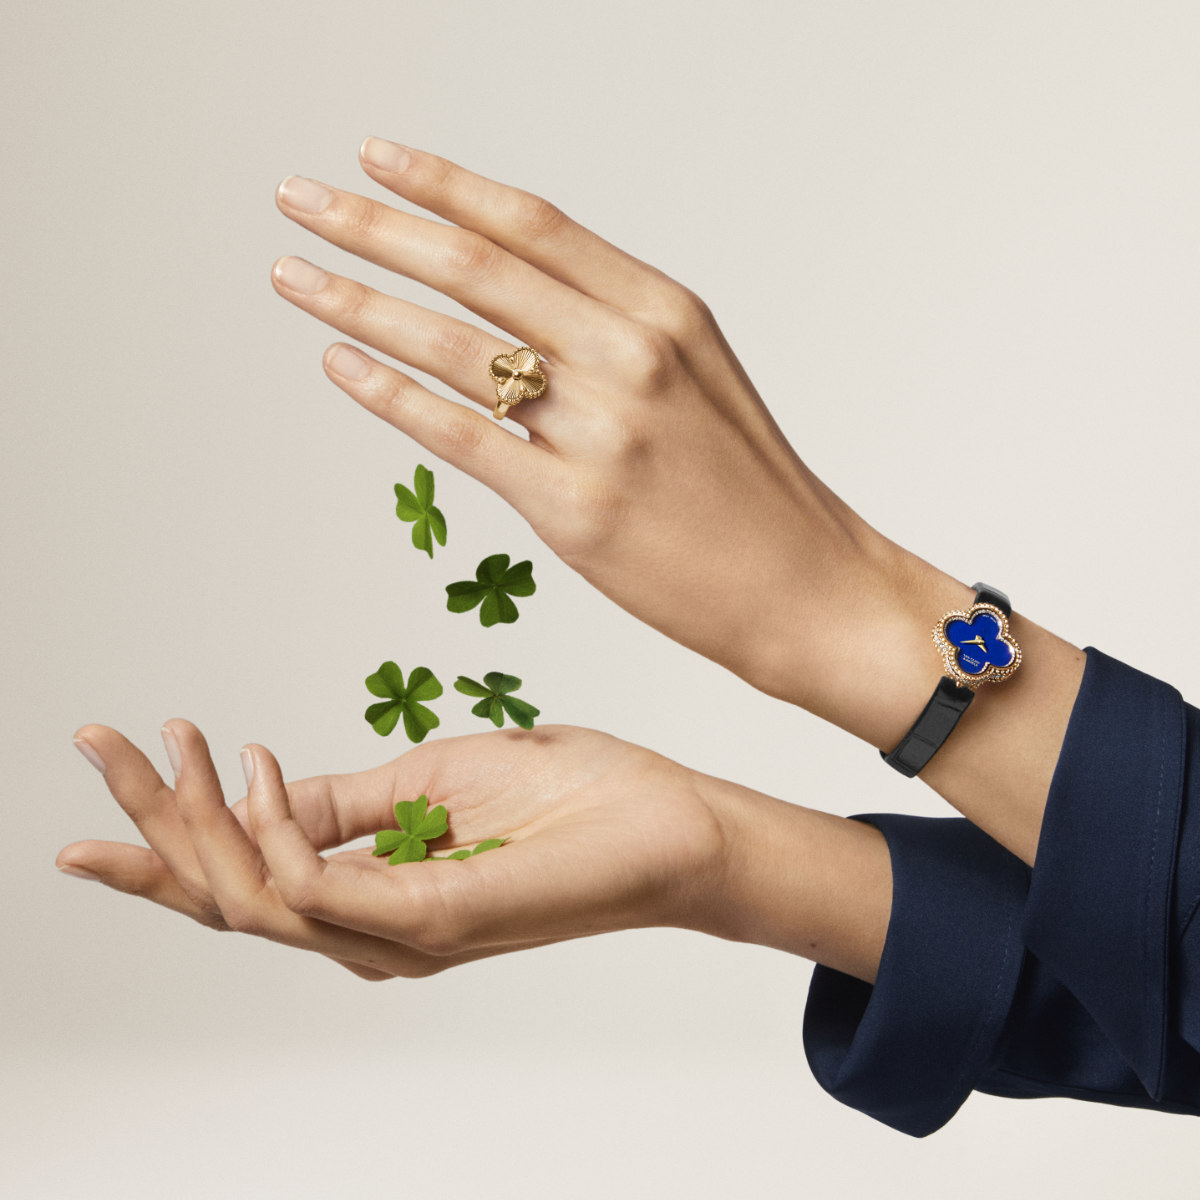 Van Cleef & Arpels' Alhambra Collection Welcomes Four Secret Pendant Watch  Models - Luxferity Magazine